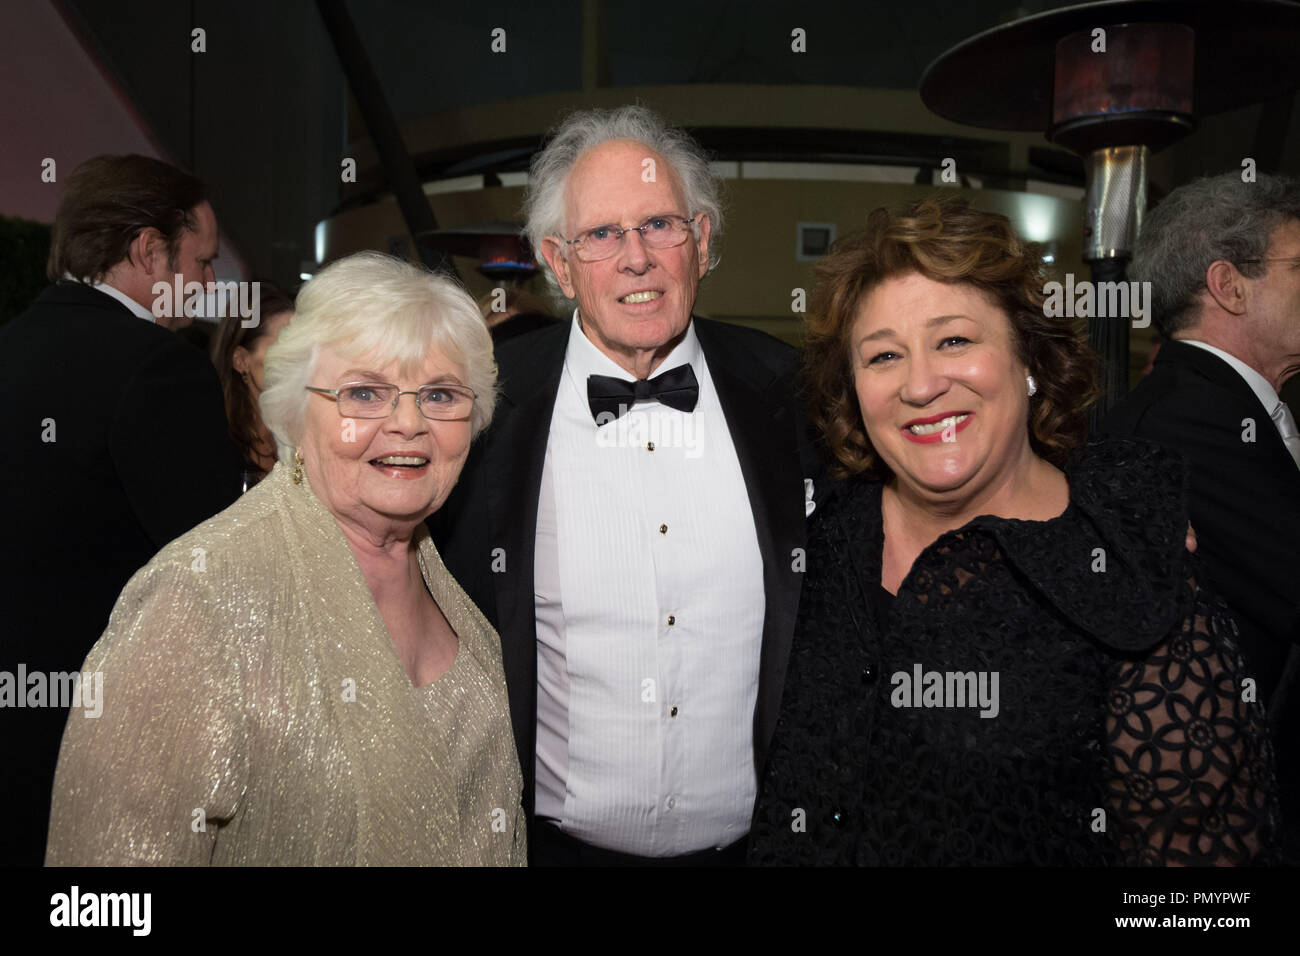 Actors June Squibb (left), Bruce Dern (center) and Margot Martindale attend the 2013 Governors Awards at The Ray Dolby Ballroom at Hollywood & Highland Center® in Hollywood, CA, on Saturday, November 16, 2013.  File Reference # 32184 016  For Editorial Use Only -  All Rights Reserved Stock Photo